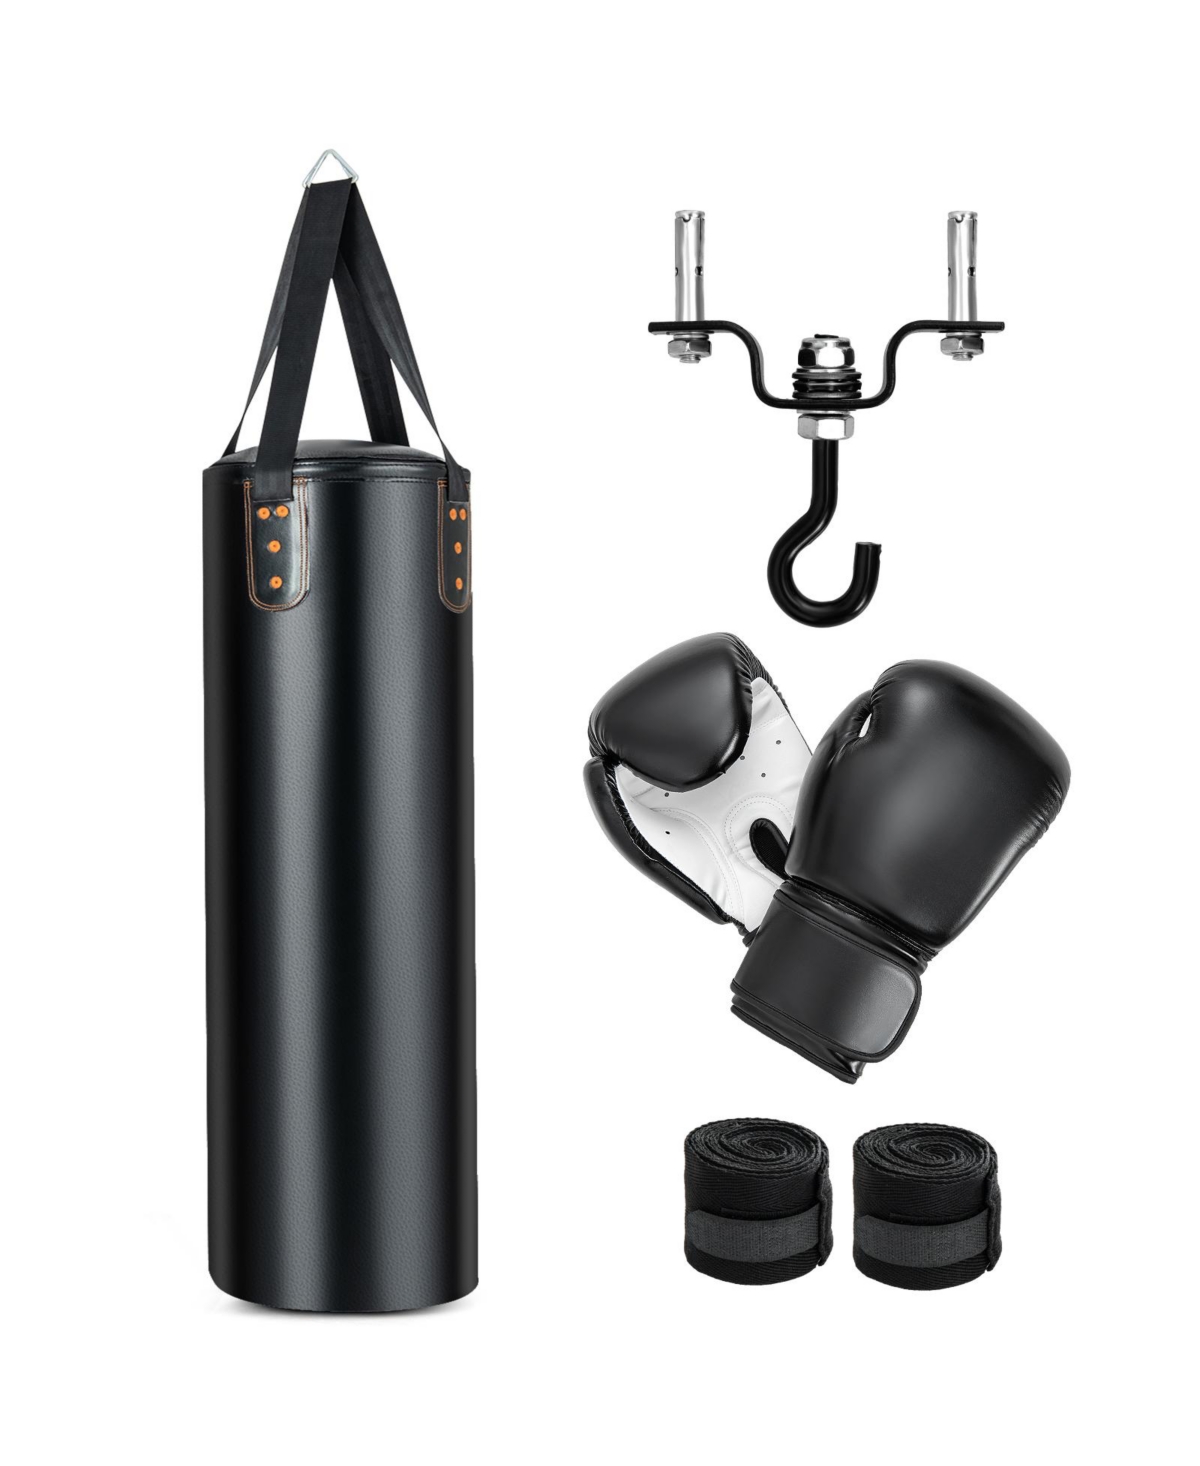 4-In-1 Hanging Punching Bag Set with Punching Gloves and Ceiling Hook - Black